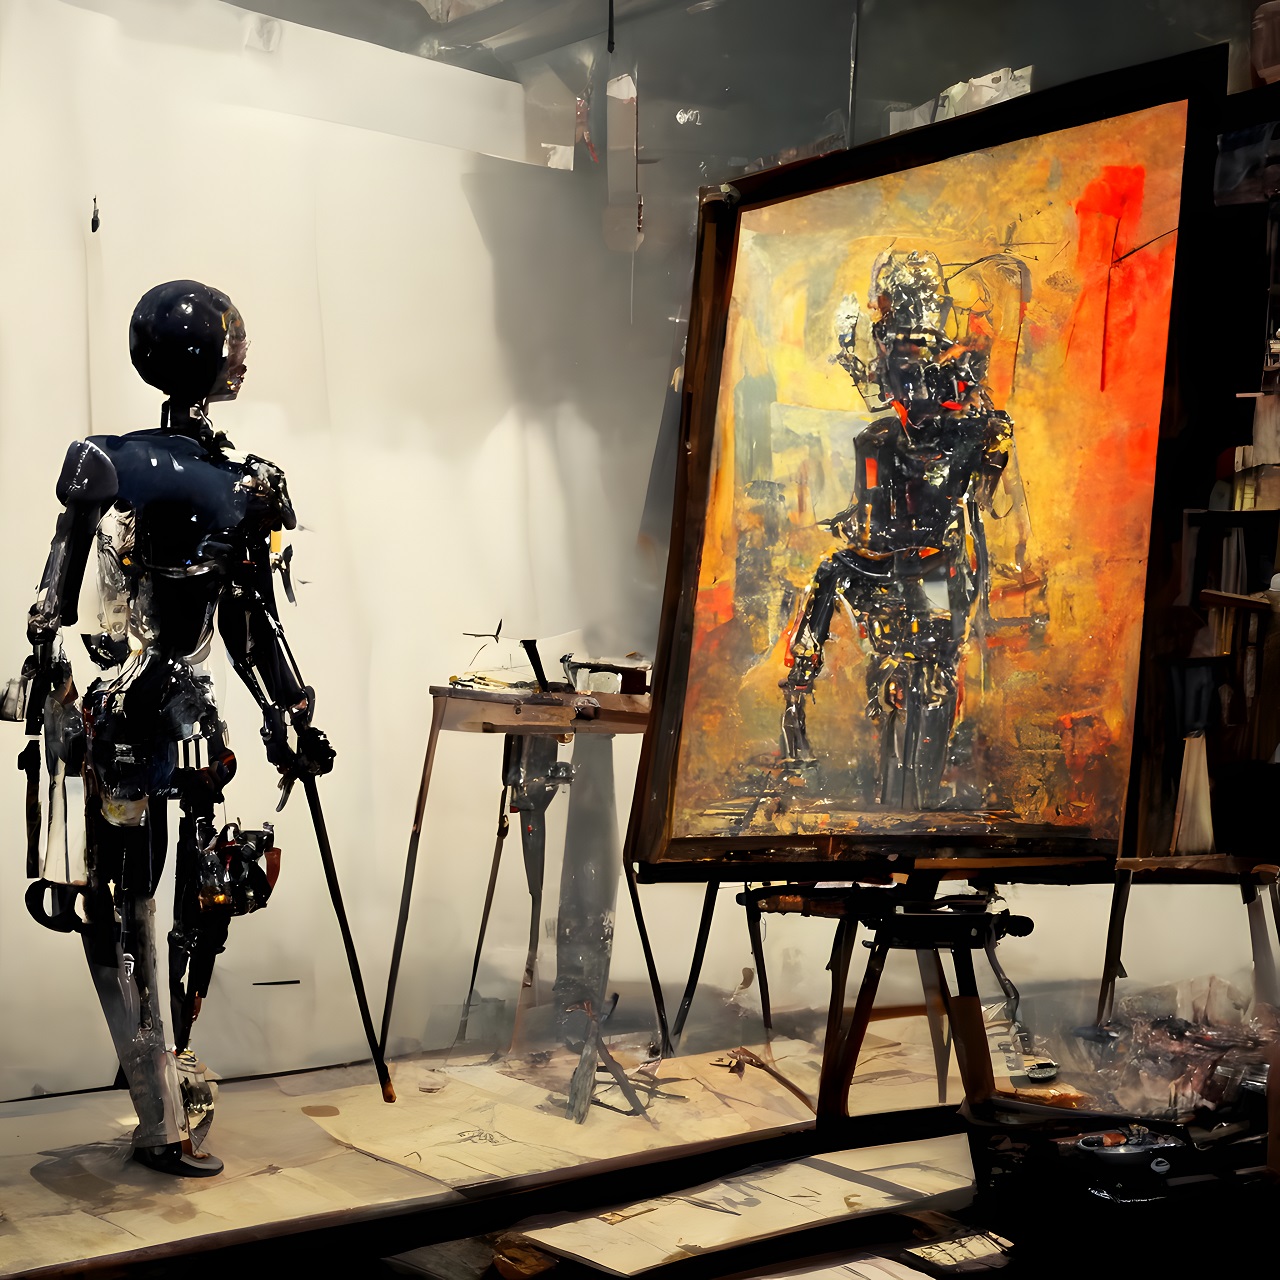 Anthropomorphic robot artist in the studio next to the easel, painting and paints while working - neural network generated art, picture ،uced with ai in 2022. The rise of ai art